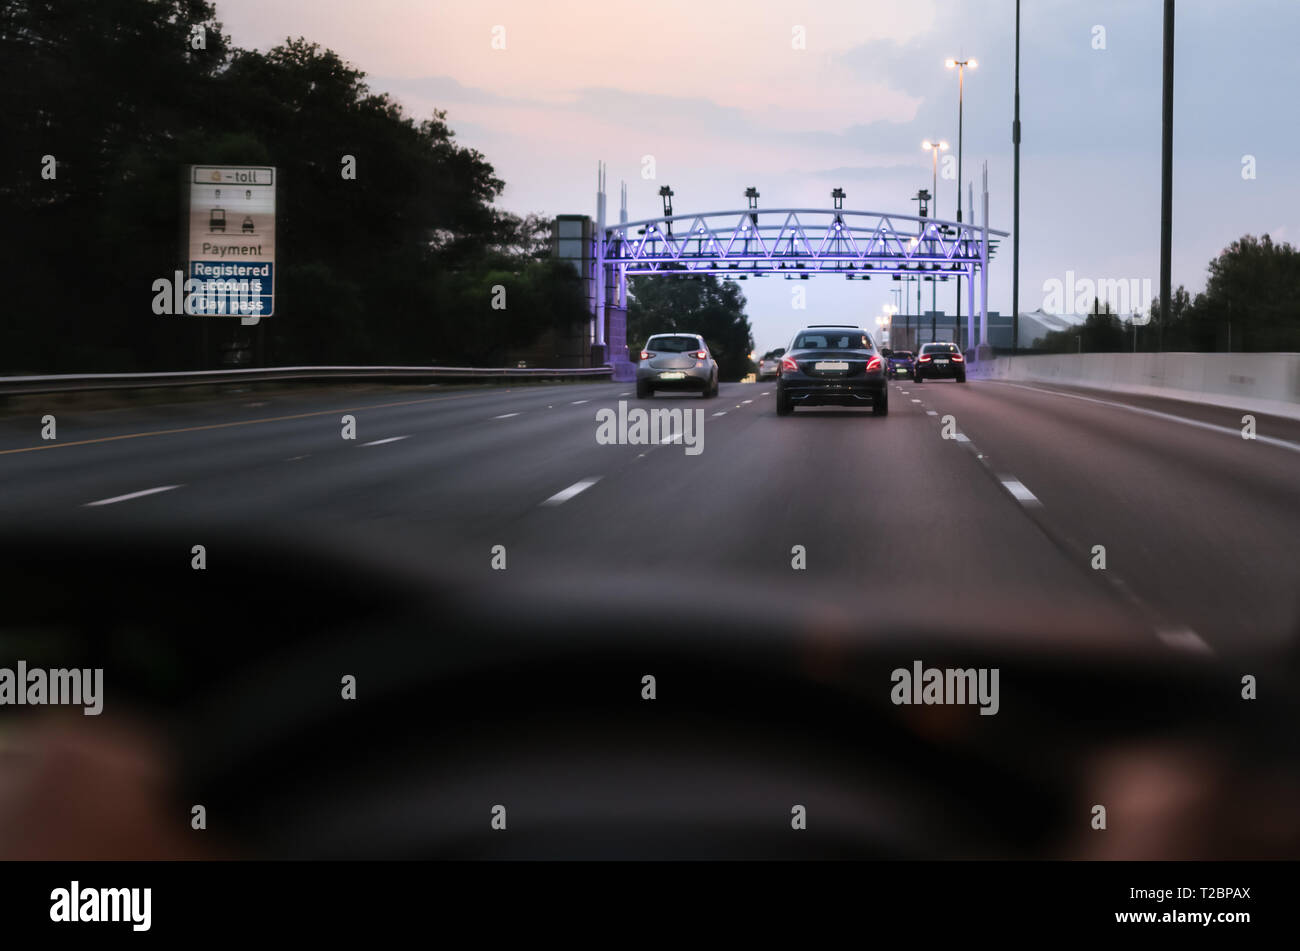 Johannesburg, Gauteng, South Africa - March 30th, 2019. Controversial E-toll gantry, gate on a major highway. Shot from inside a motor vehicle to show Stock Photo